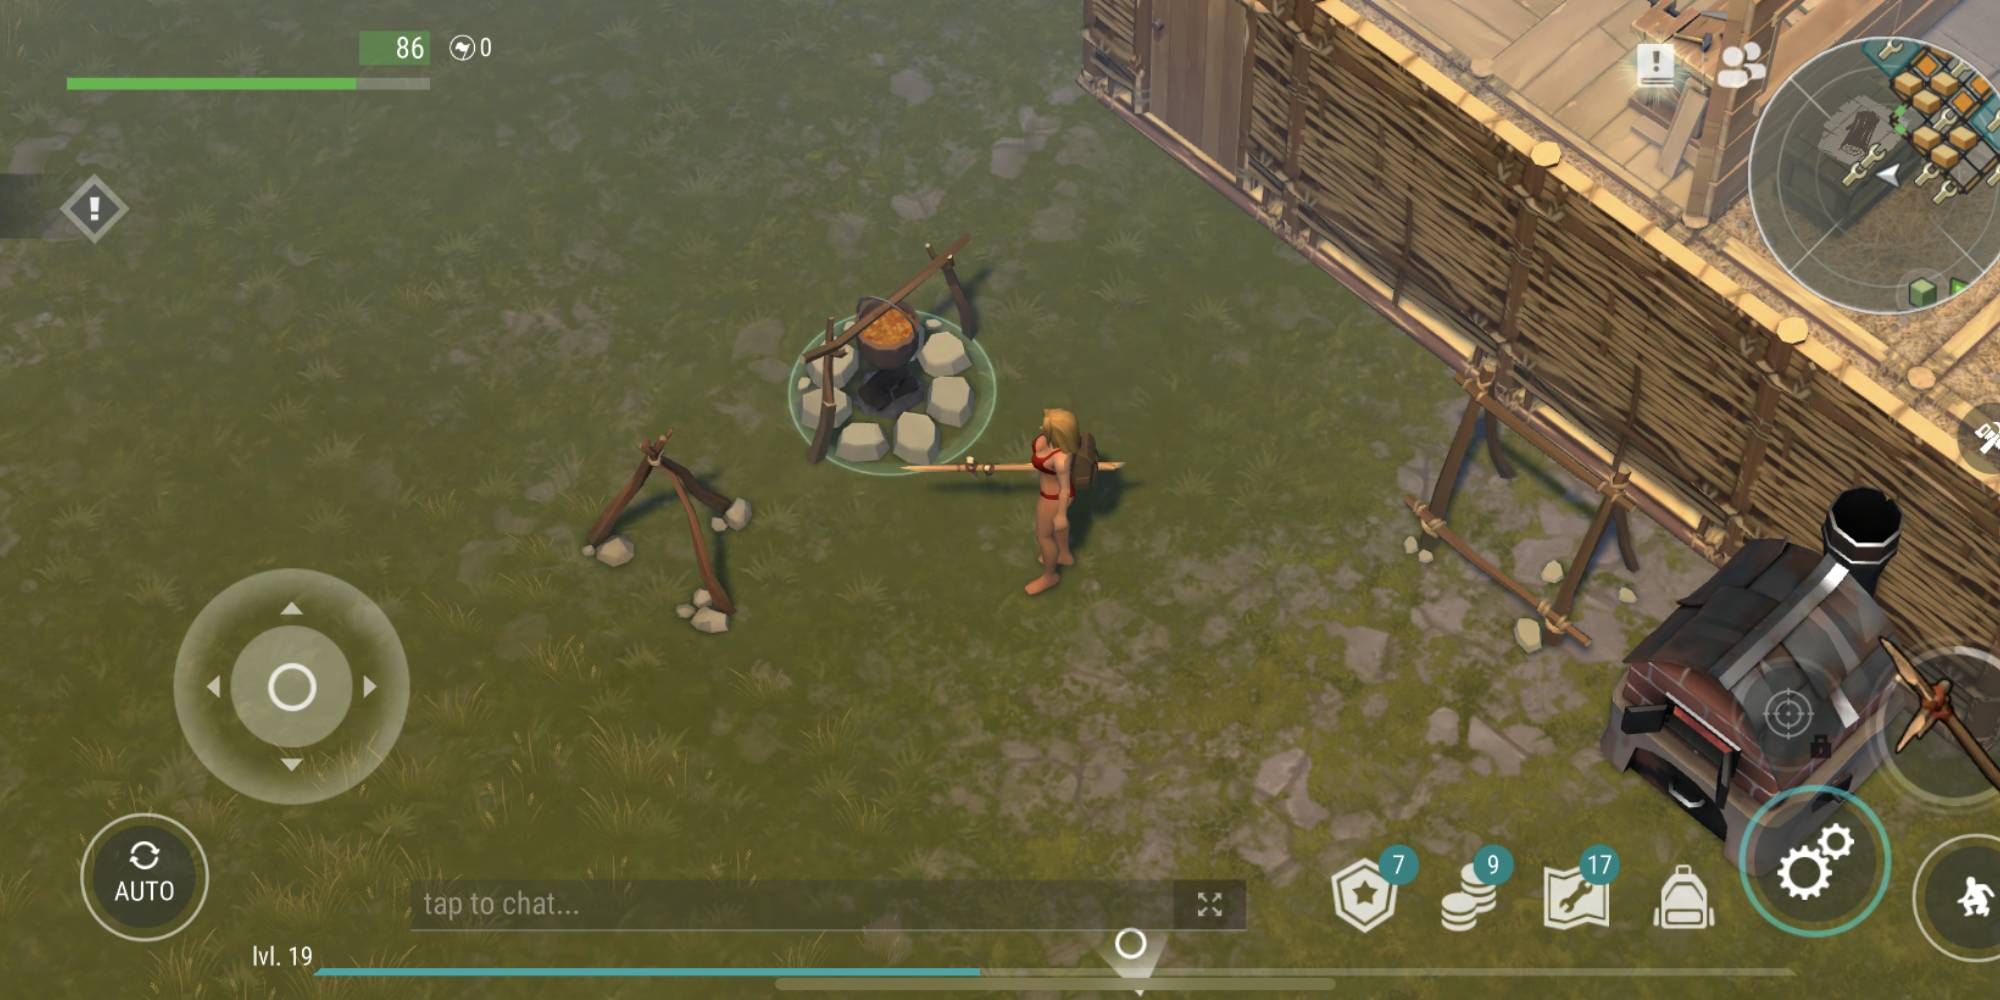 A player home base with a fire pit and a player with a spear standing in the middle of the image